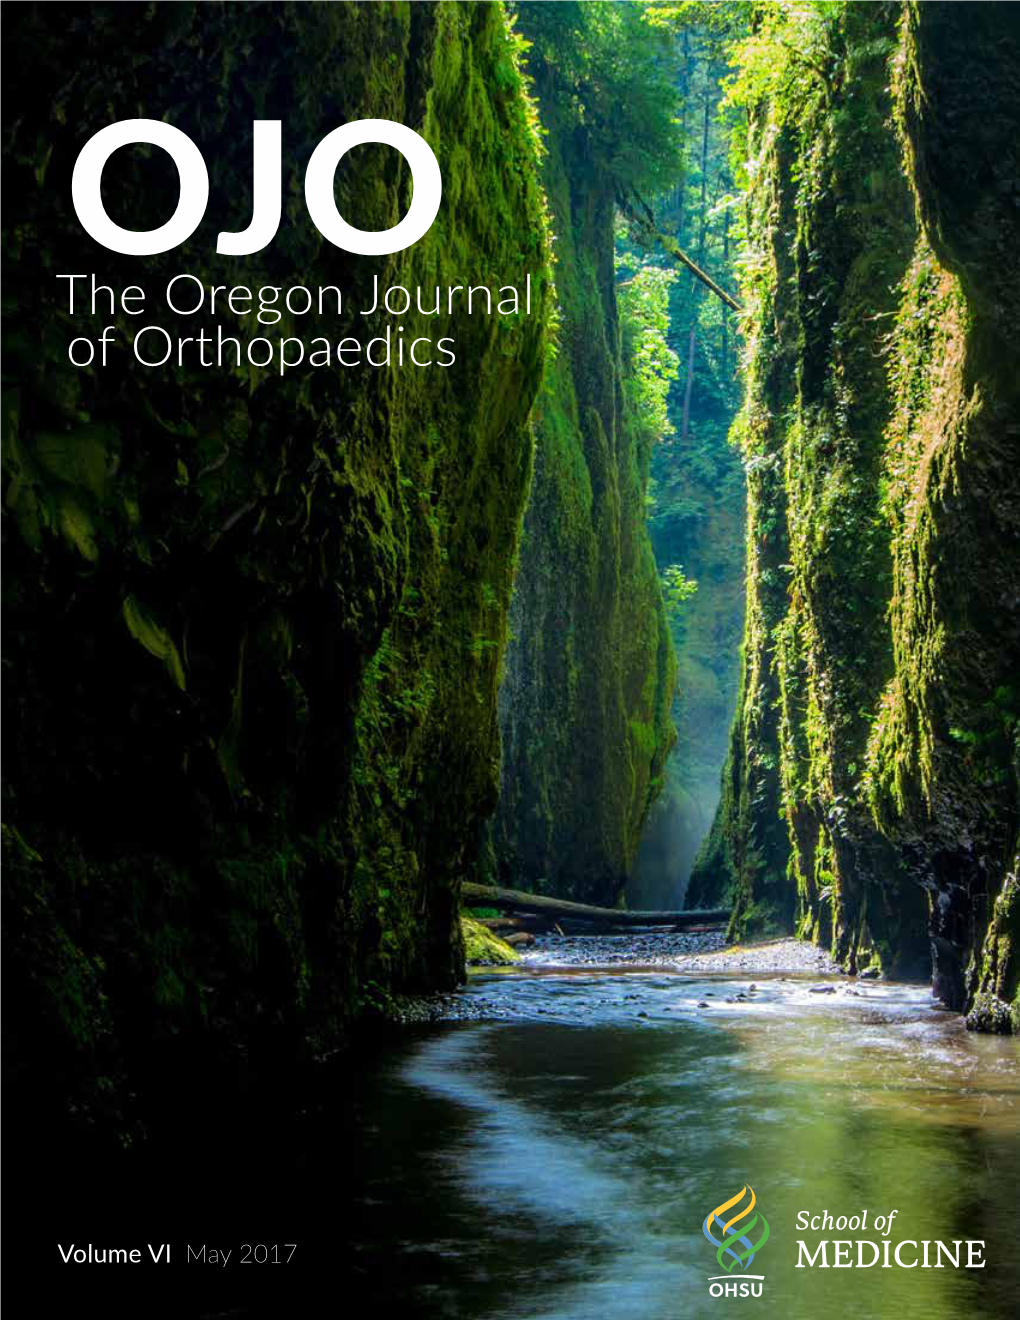 The Oregon Journal of Orthopaedics Letter from the Editors